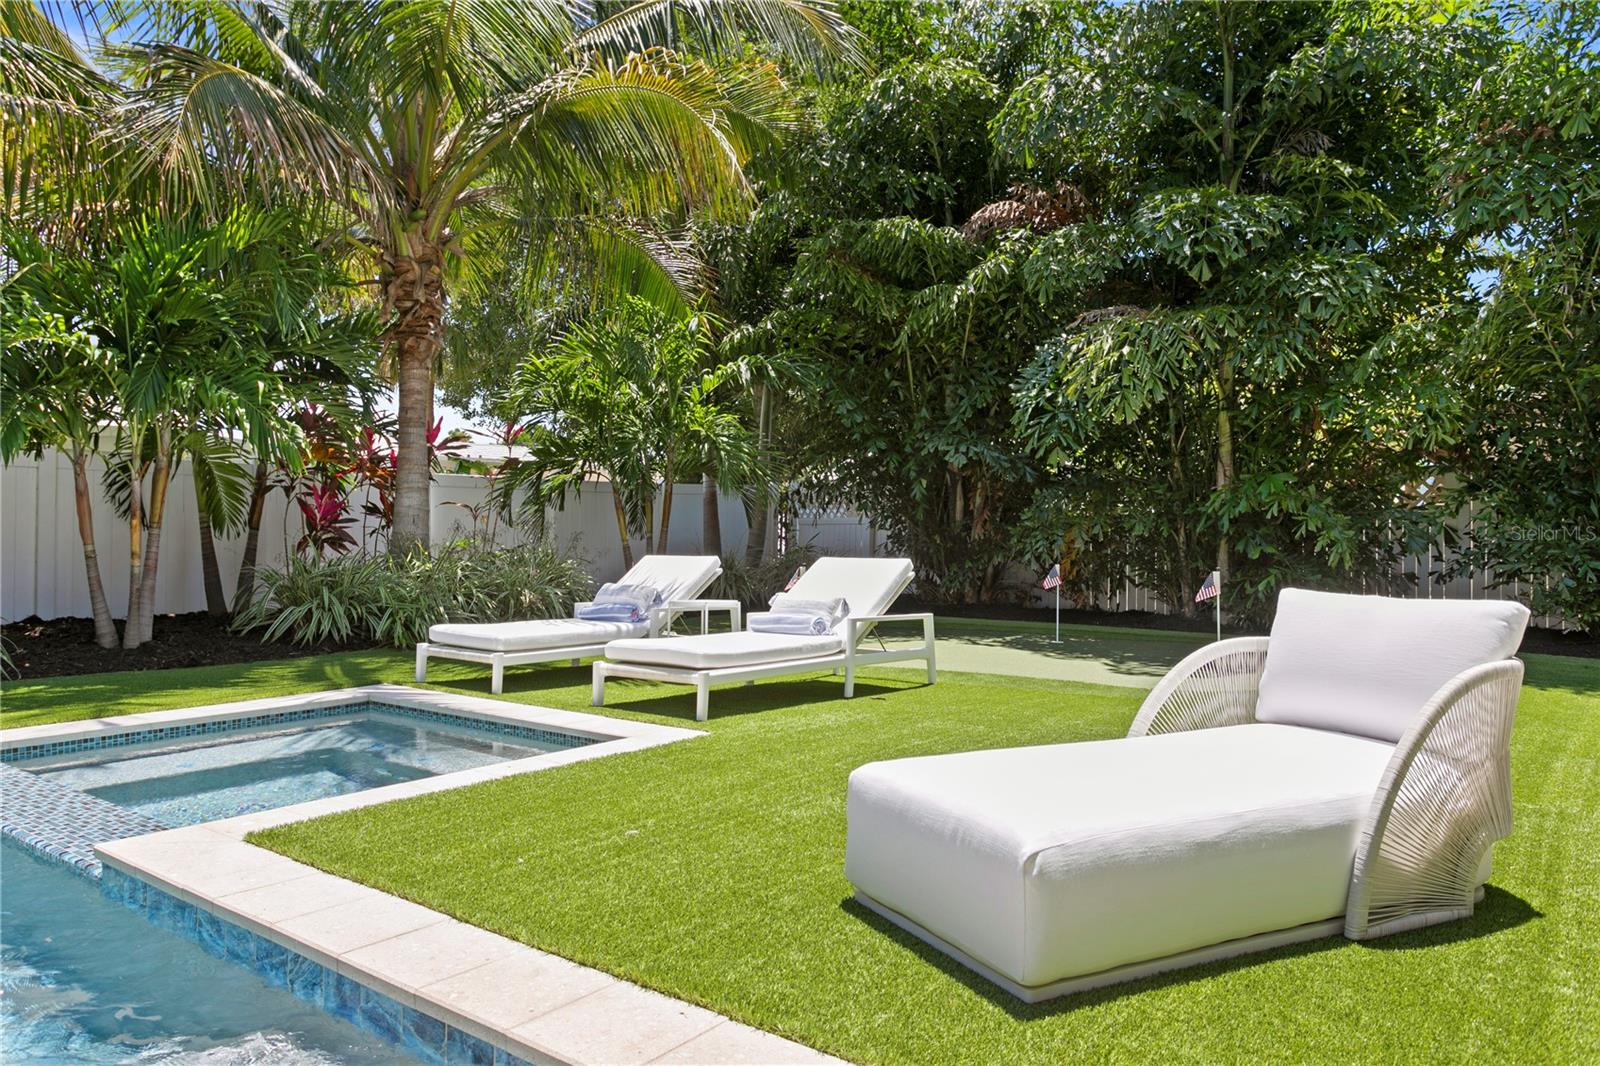 Oversized Private Backyard with heated saltwater pool, putting green and fruit trees